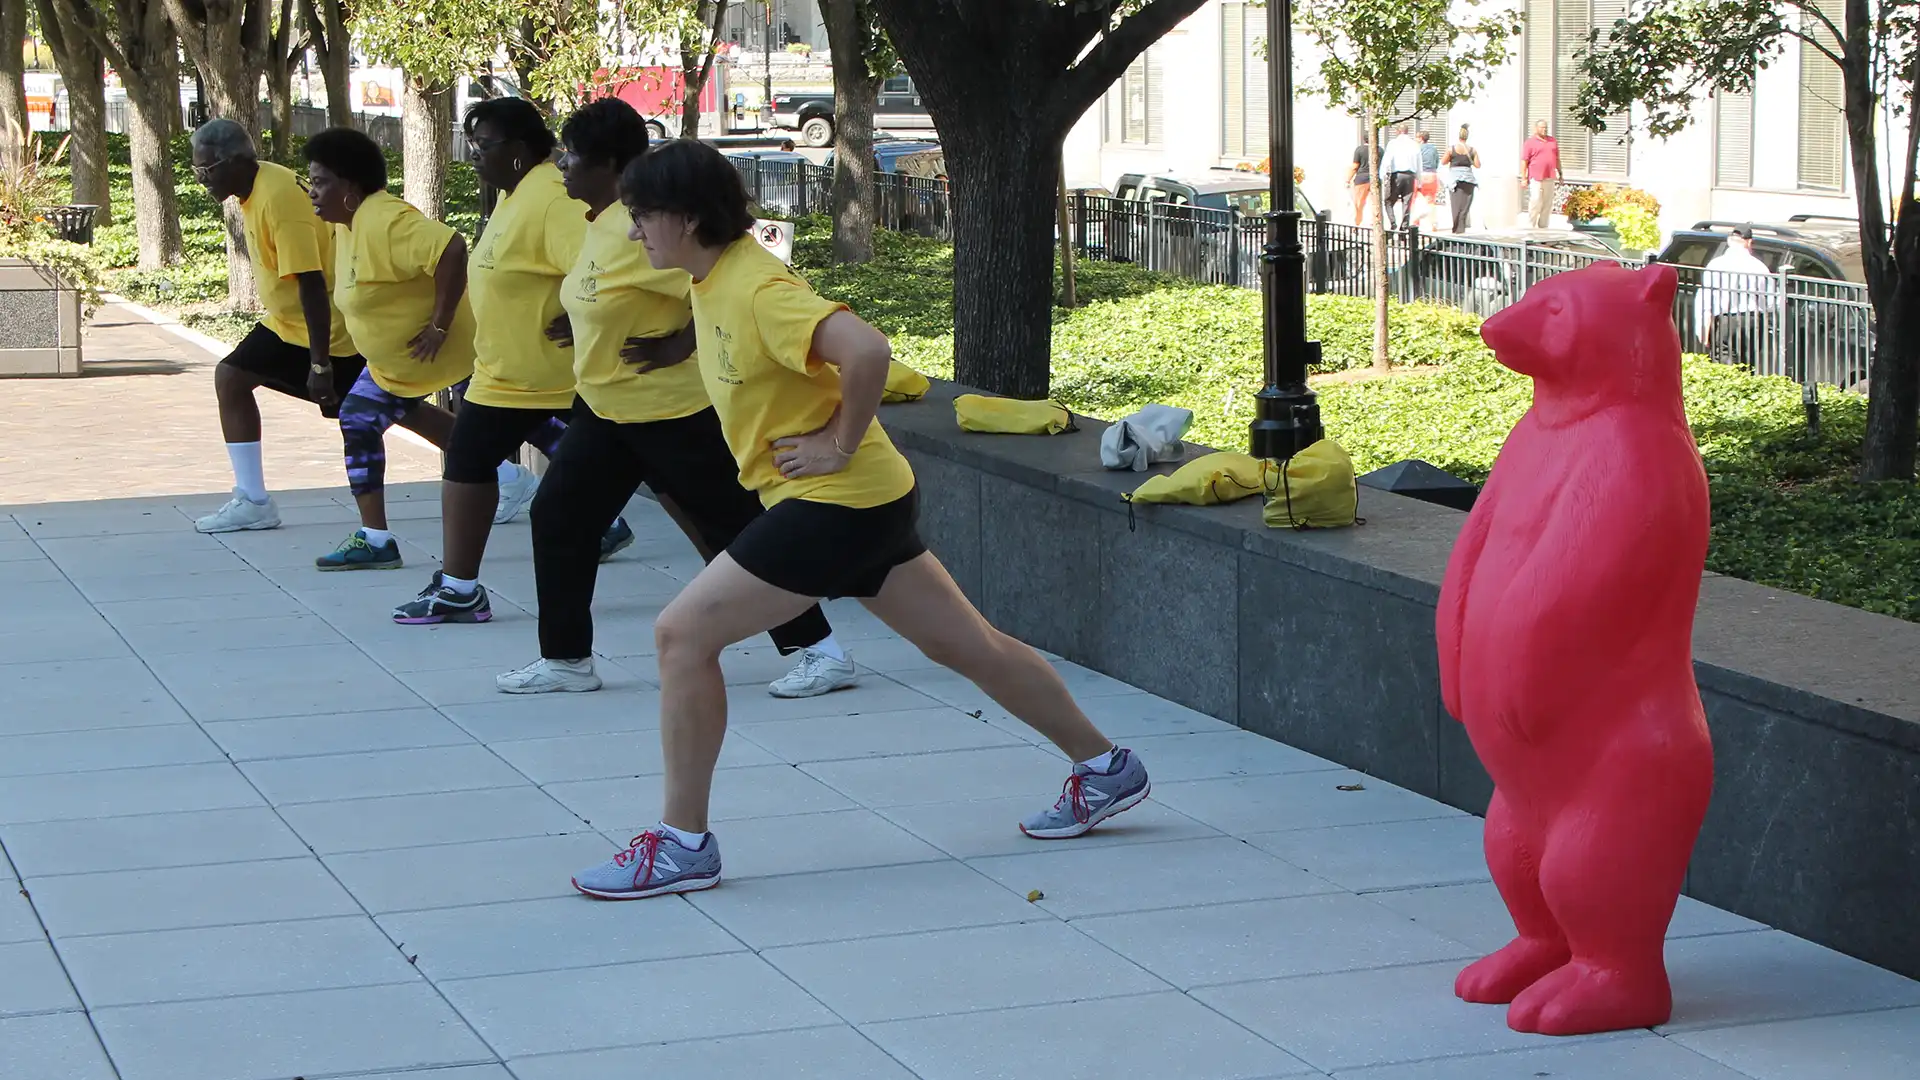 A group of people exercising next to a red bear statue.